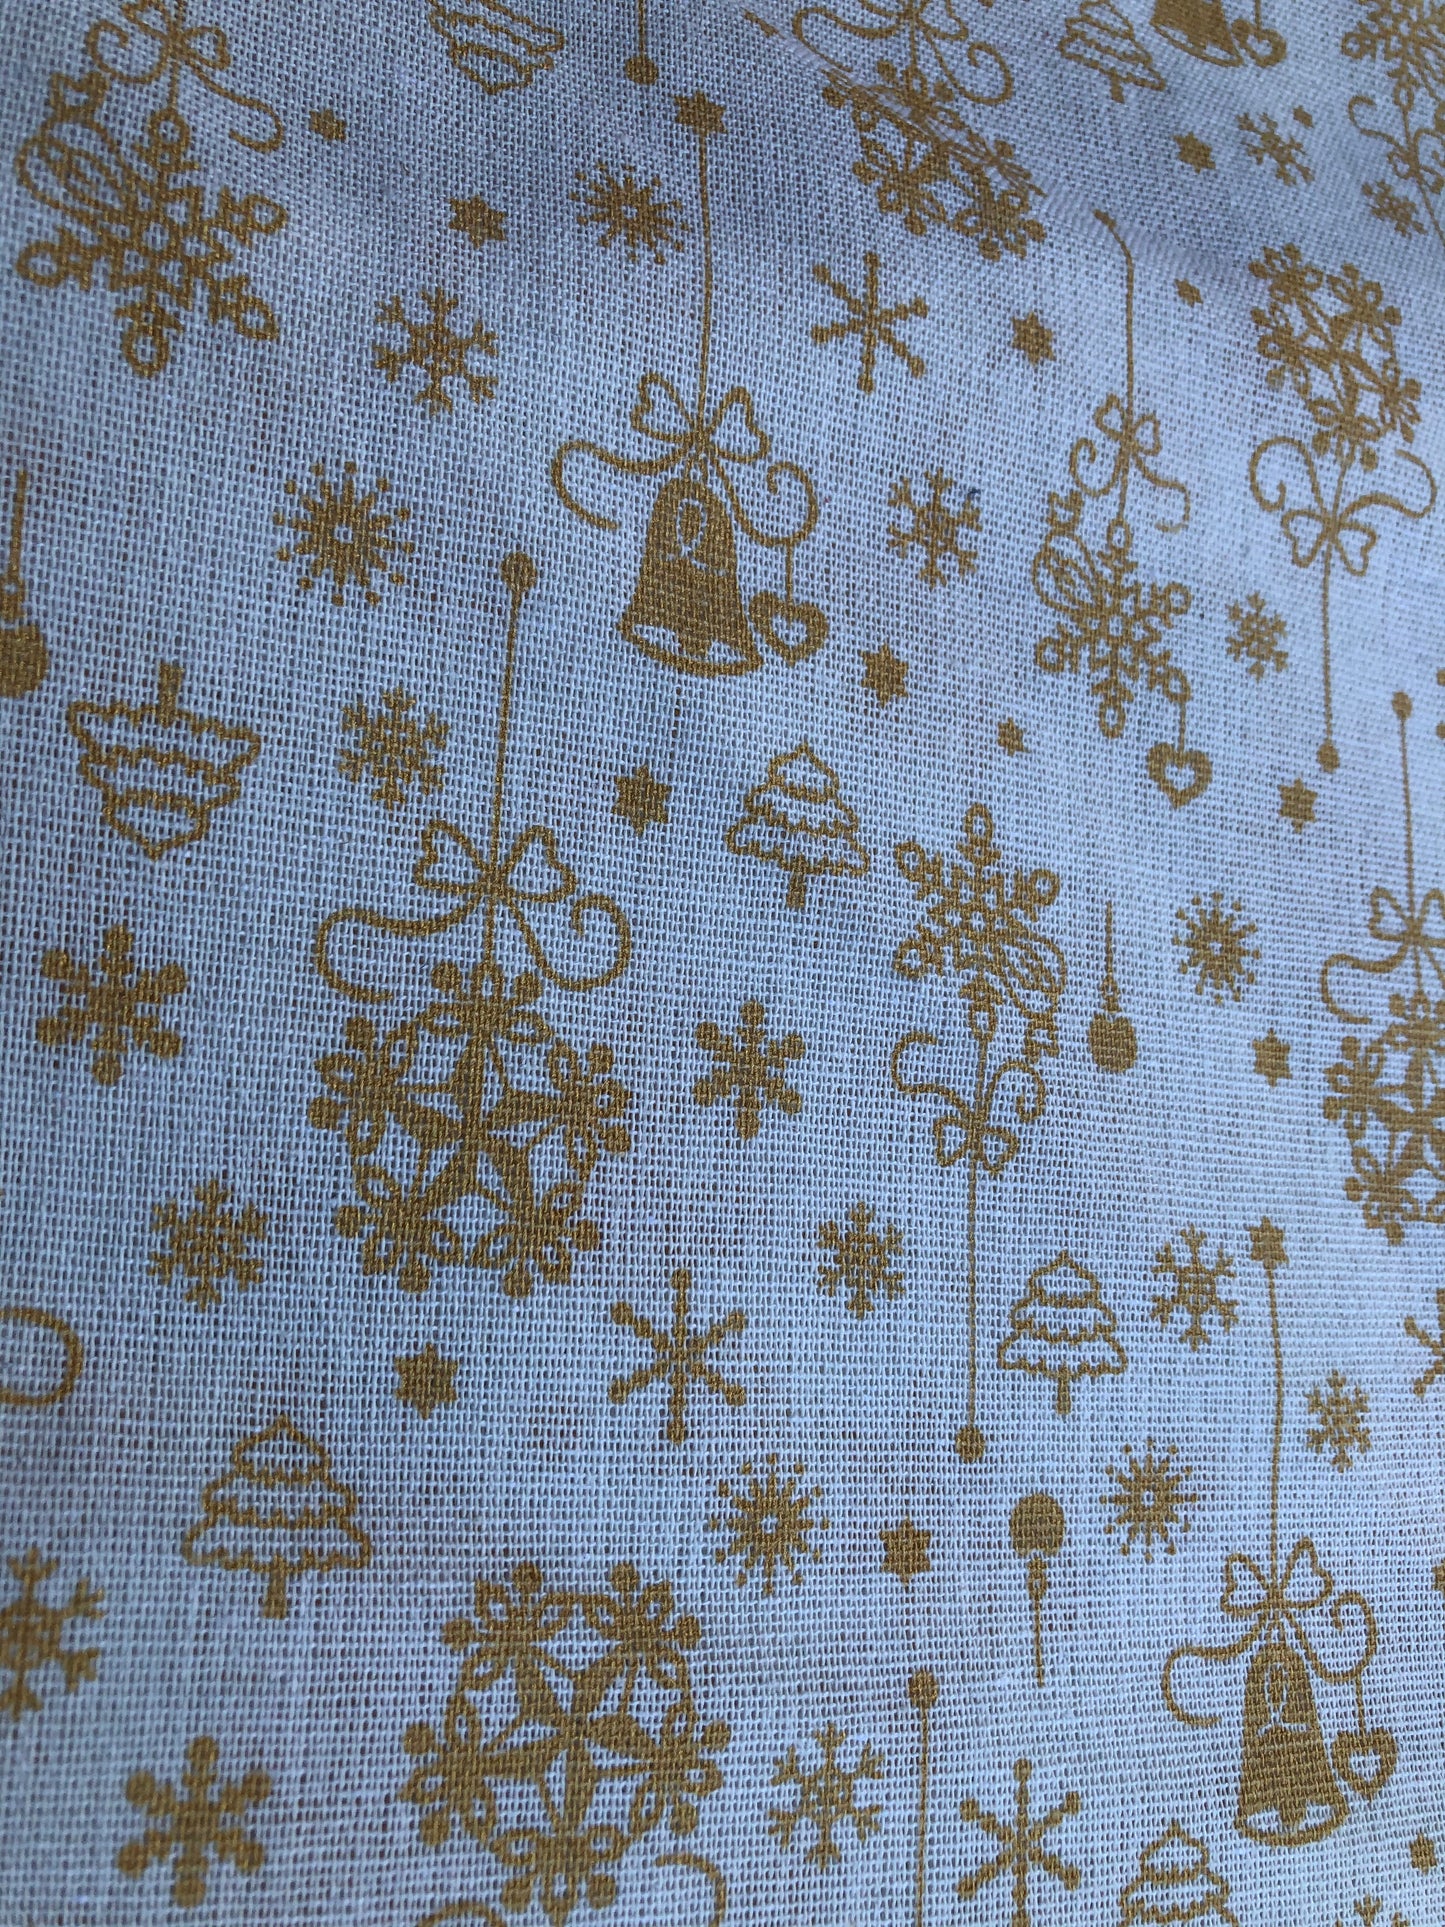 Reduce to clear Christmas fabrics, market stall tablecloth, 300cm x 150cm piece